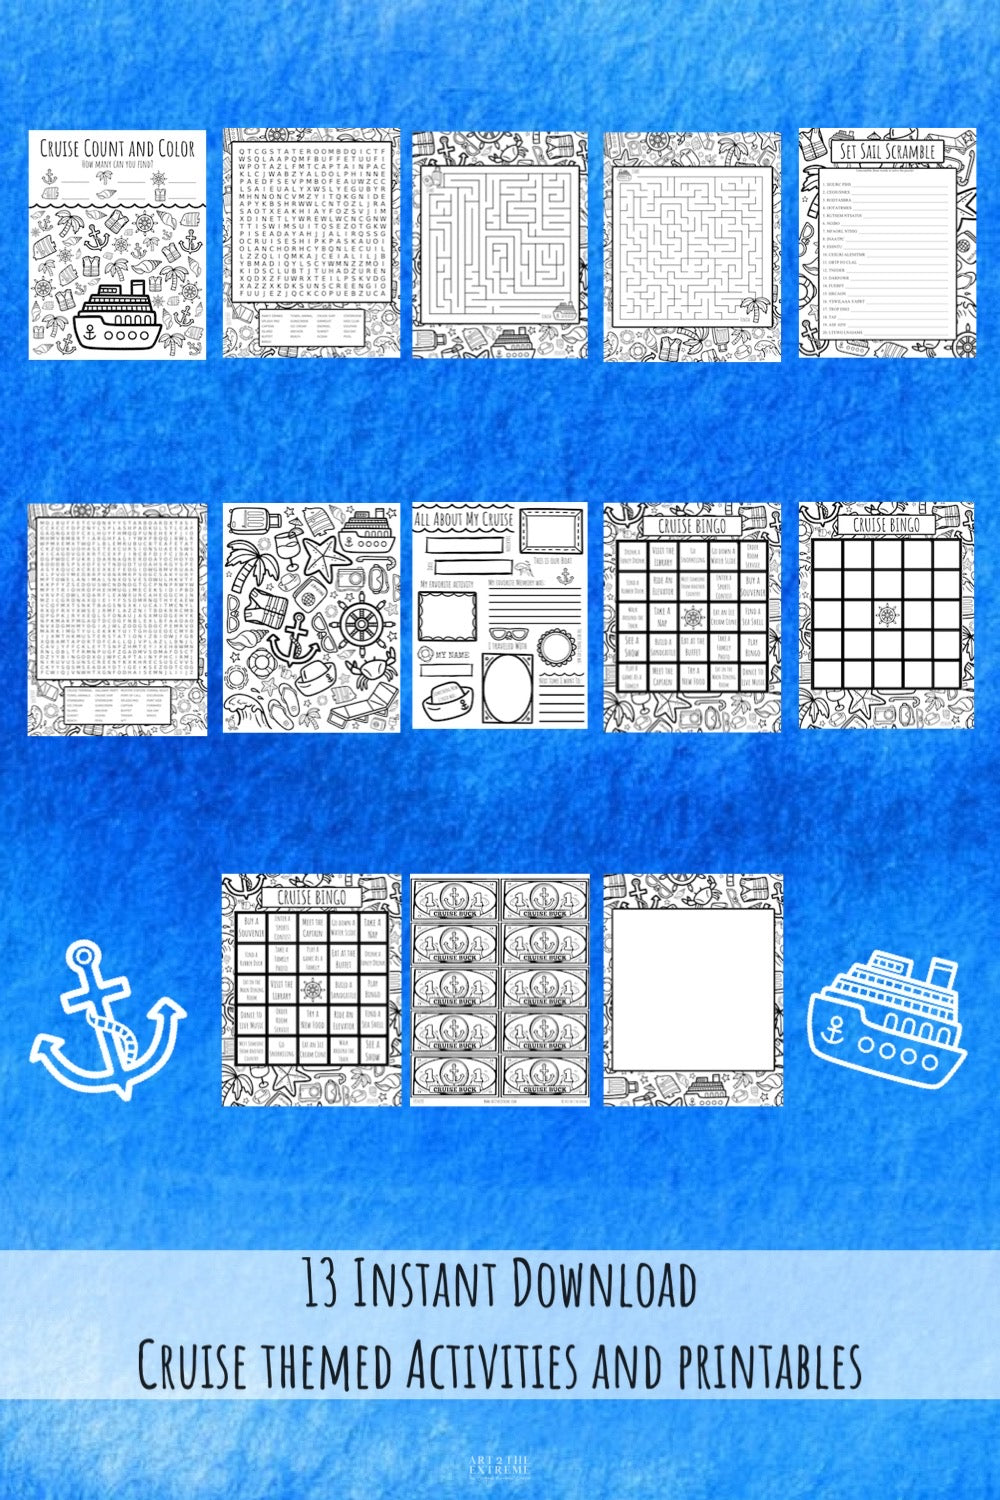 13 printable cruise themed worksheets and coloring sheets on a blue background. Printable cruise activities for kids to keep them entertained. 